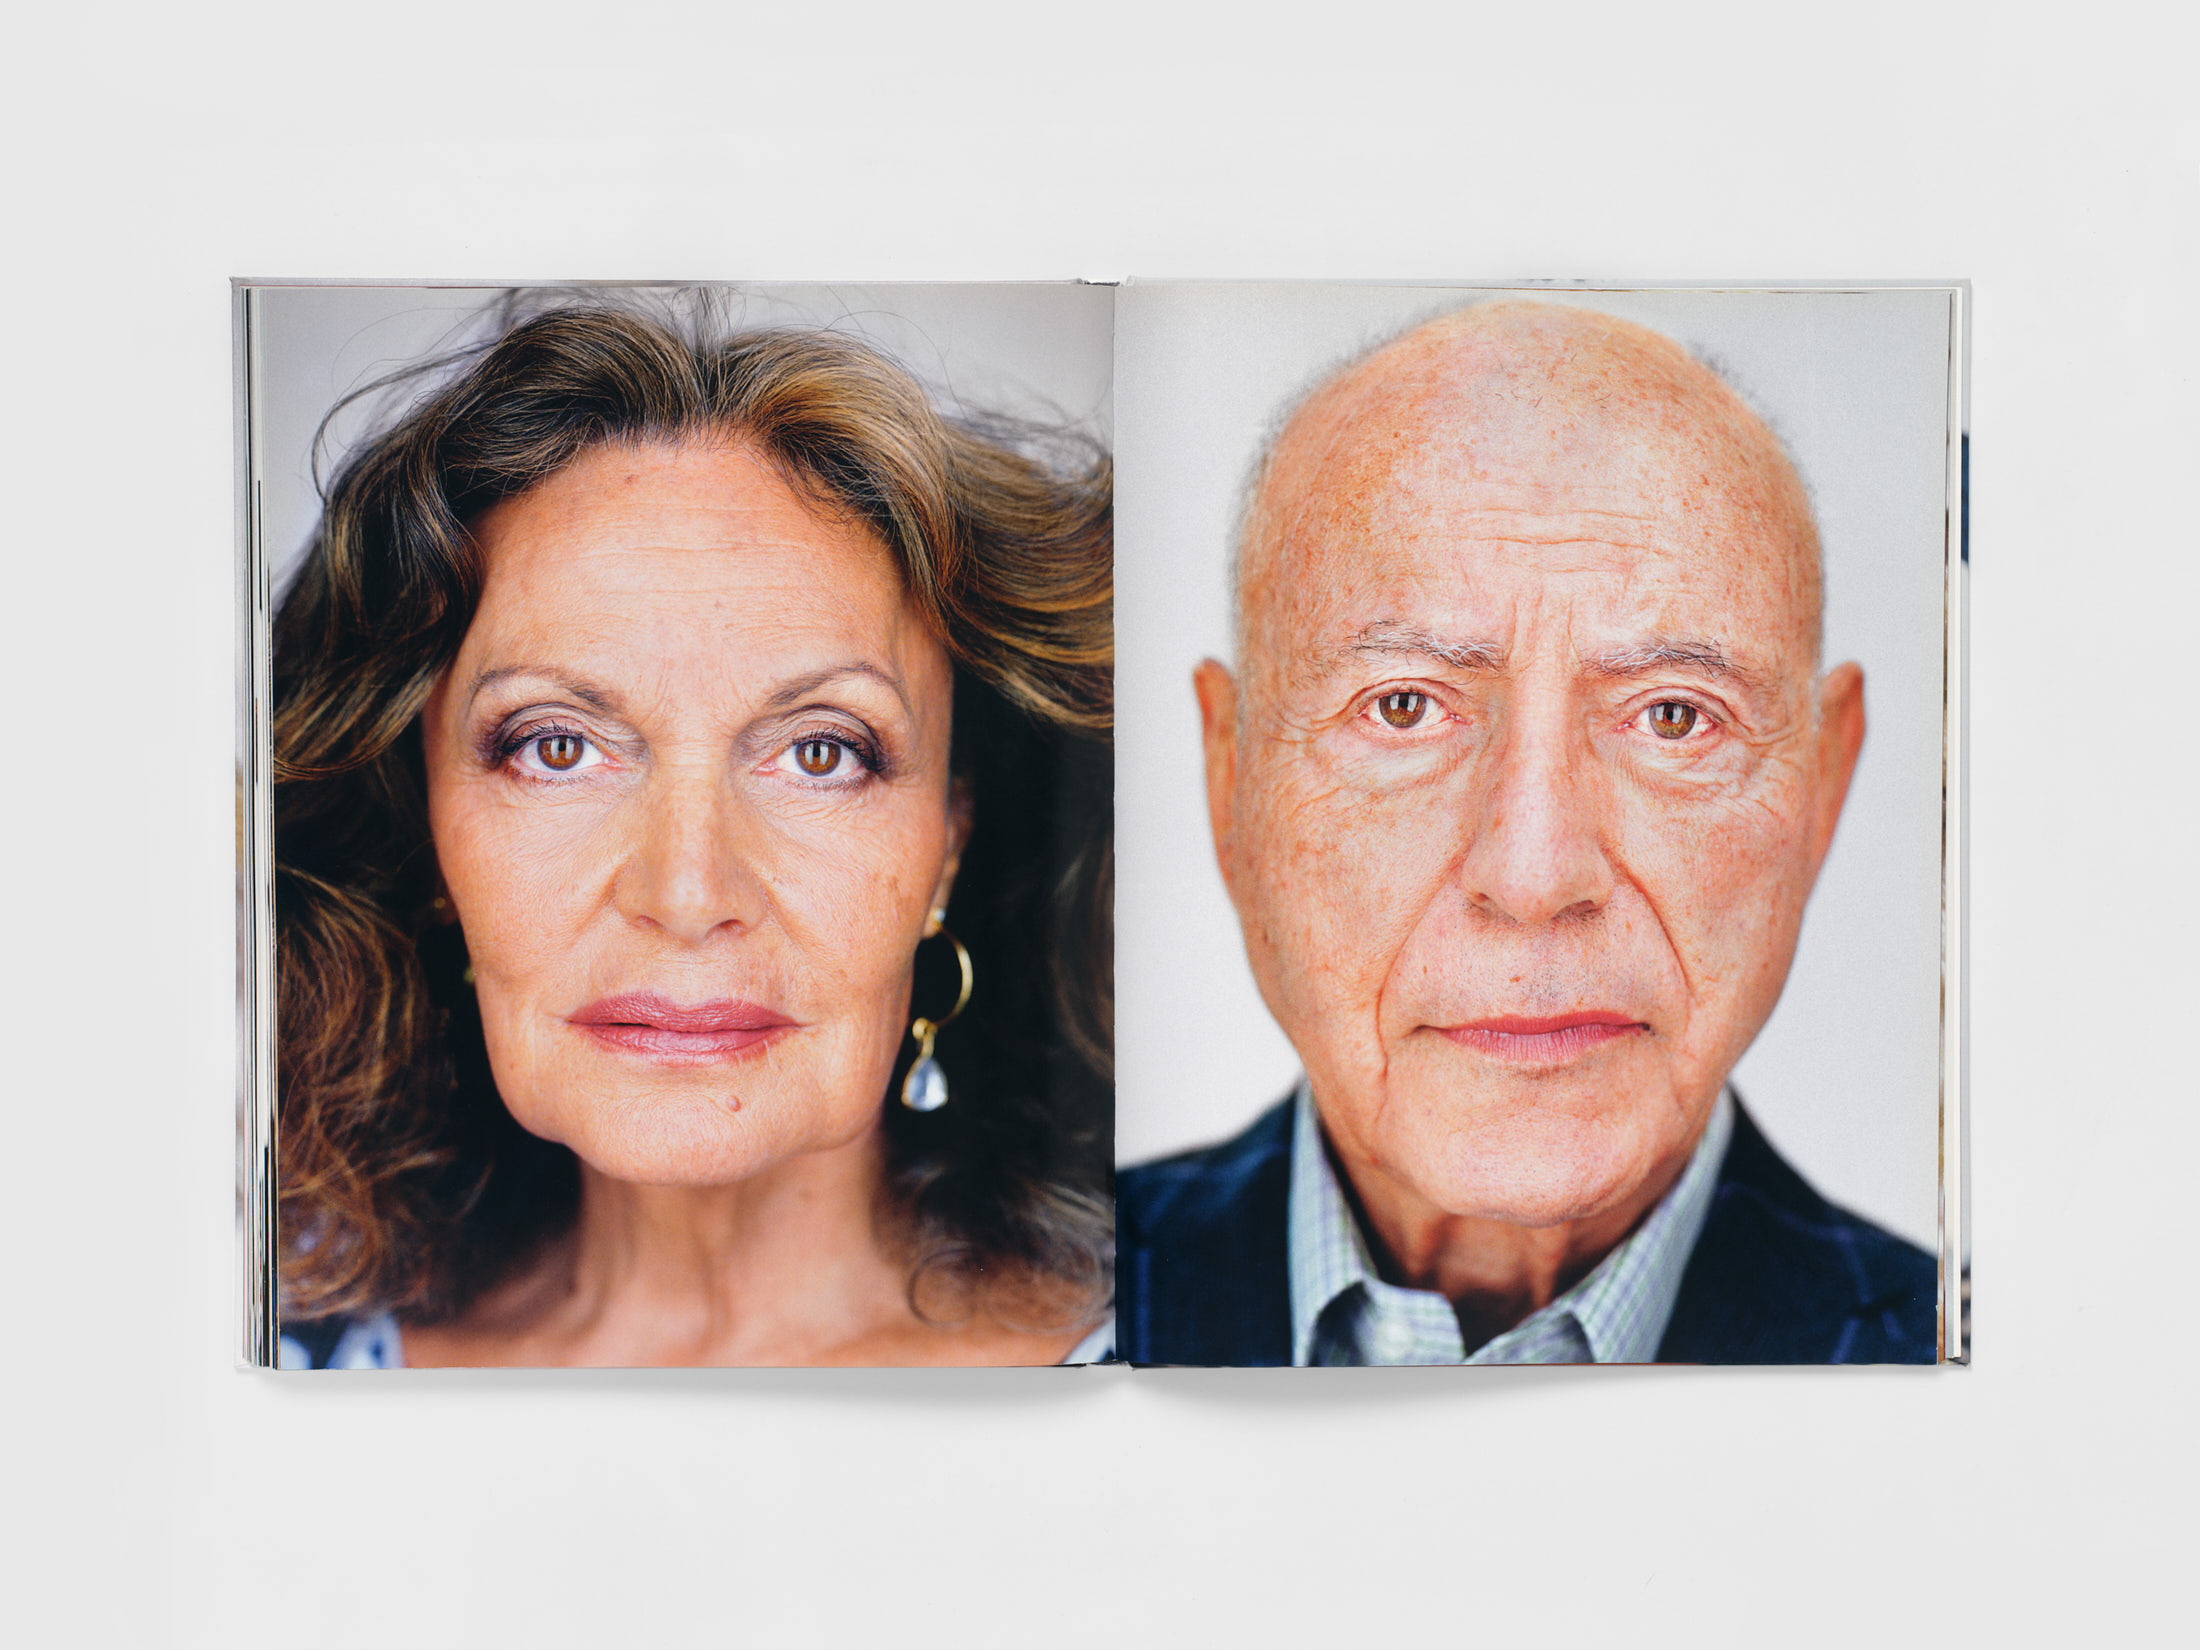 Martin Schoeller, Campino (2006), Available for Sale